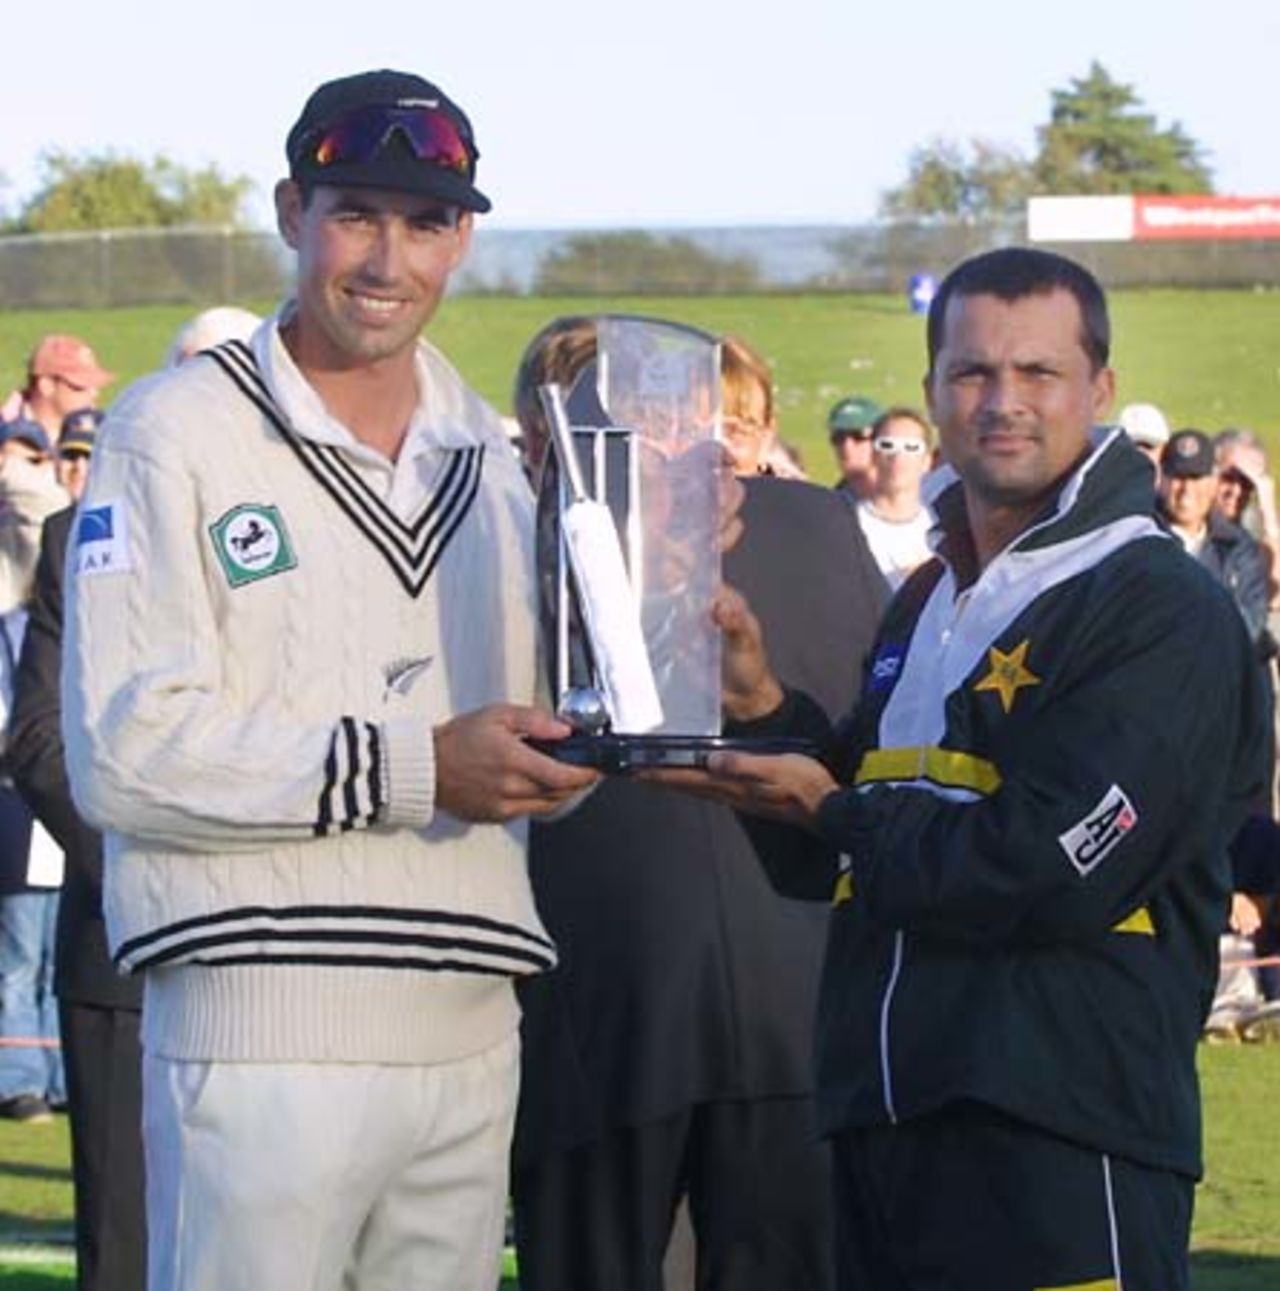 New Zealand captain Stephen Fleming and Pakistan touring captain Moin Khan (Inzamam-ul-Haq captained the third Test side for the injured Moin) jointly hold the National Bank Test Series trophy. The series was drawn 1-1 after New Zealand completed an innings and 185 run victory, the largest victory for New Zealand and the largest defeat for Pakistan in their respective Test histories. 3rd Test: New Zealand v Pakistan at WestpacTrust Park, Hamilton, 27-31 March 2001 (Day 4).